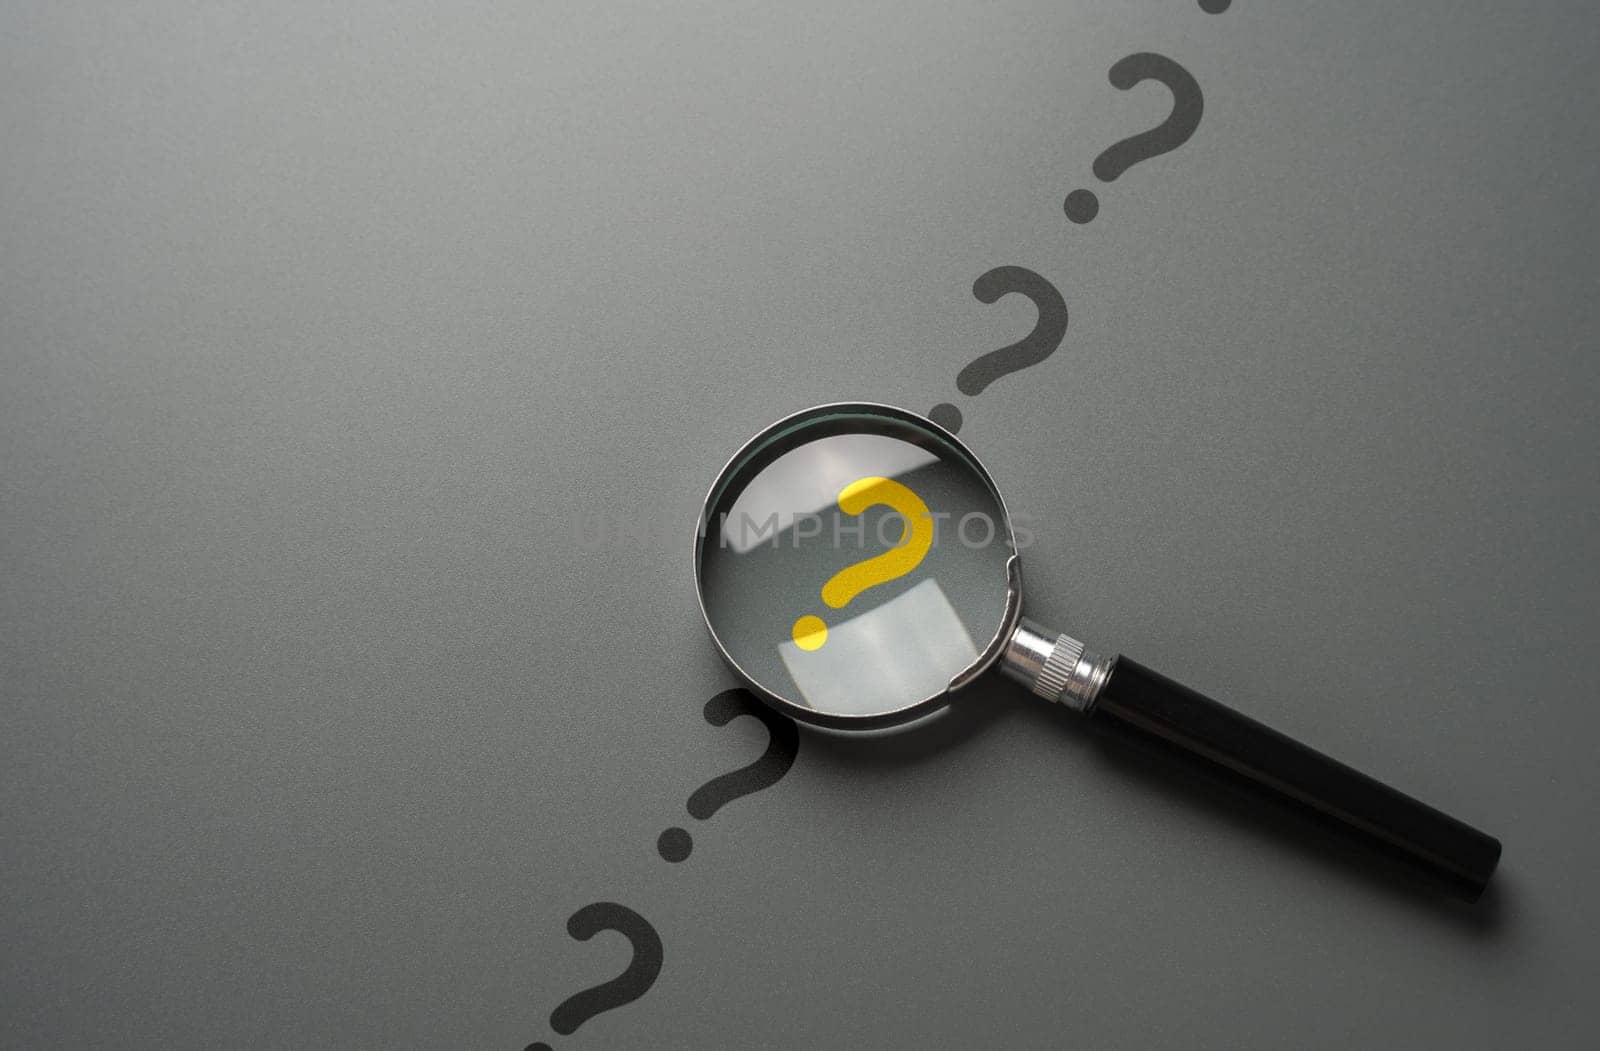 Magnifying glass and yellow question mark. FAQ. Solving mysteries, uncovering hidden truths. Curiosity, inquiry, uncertainty. Search for answers, clarity understanding. Quest for knowledge solutions